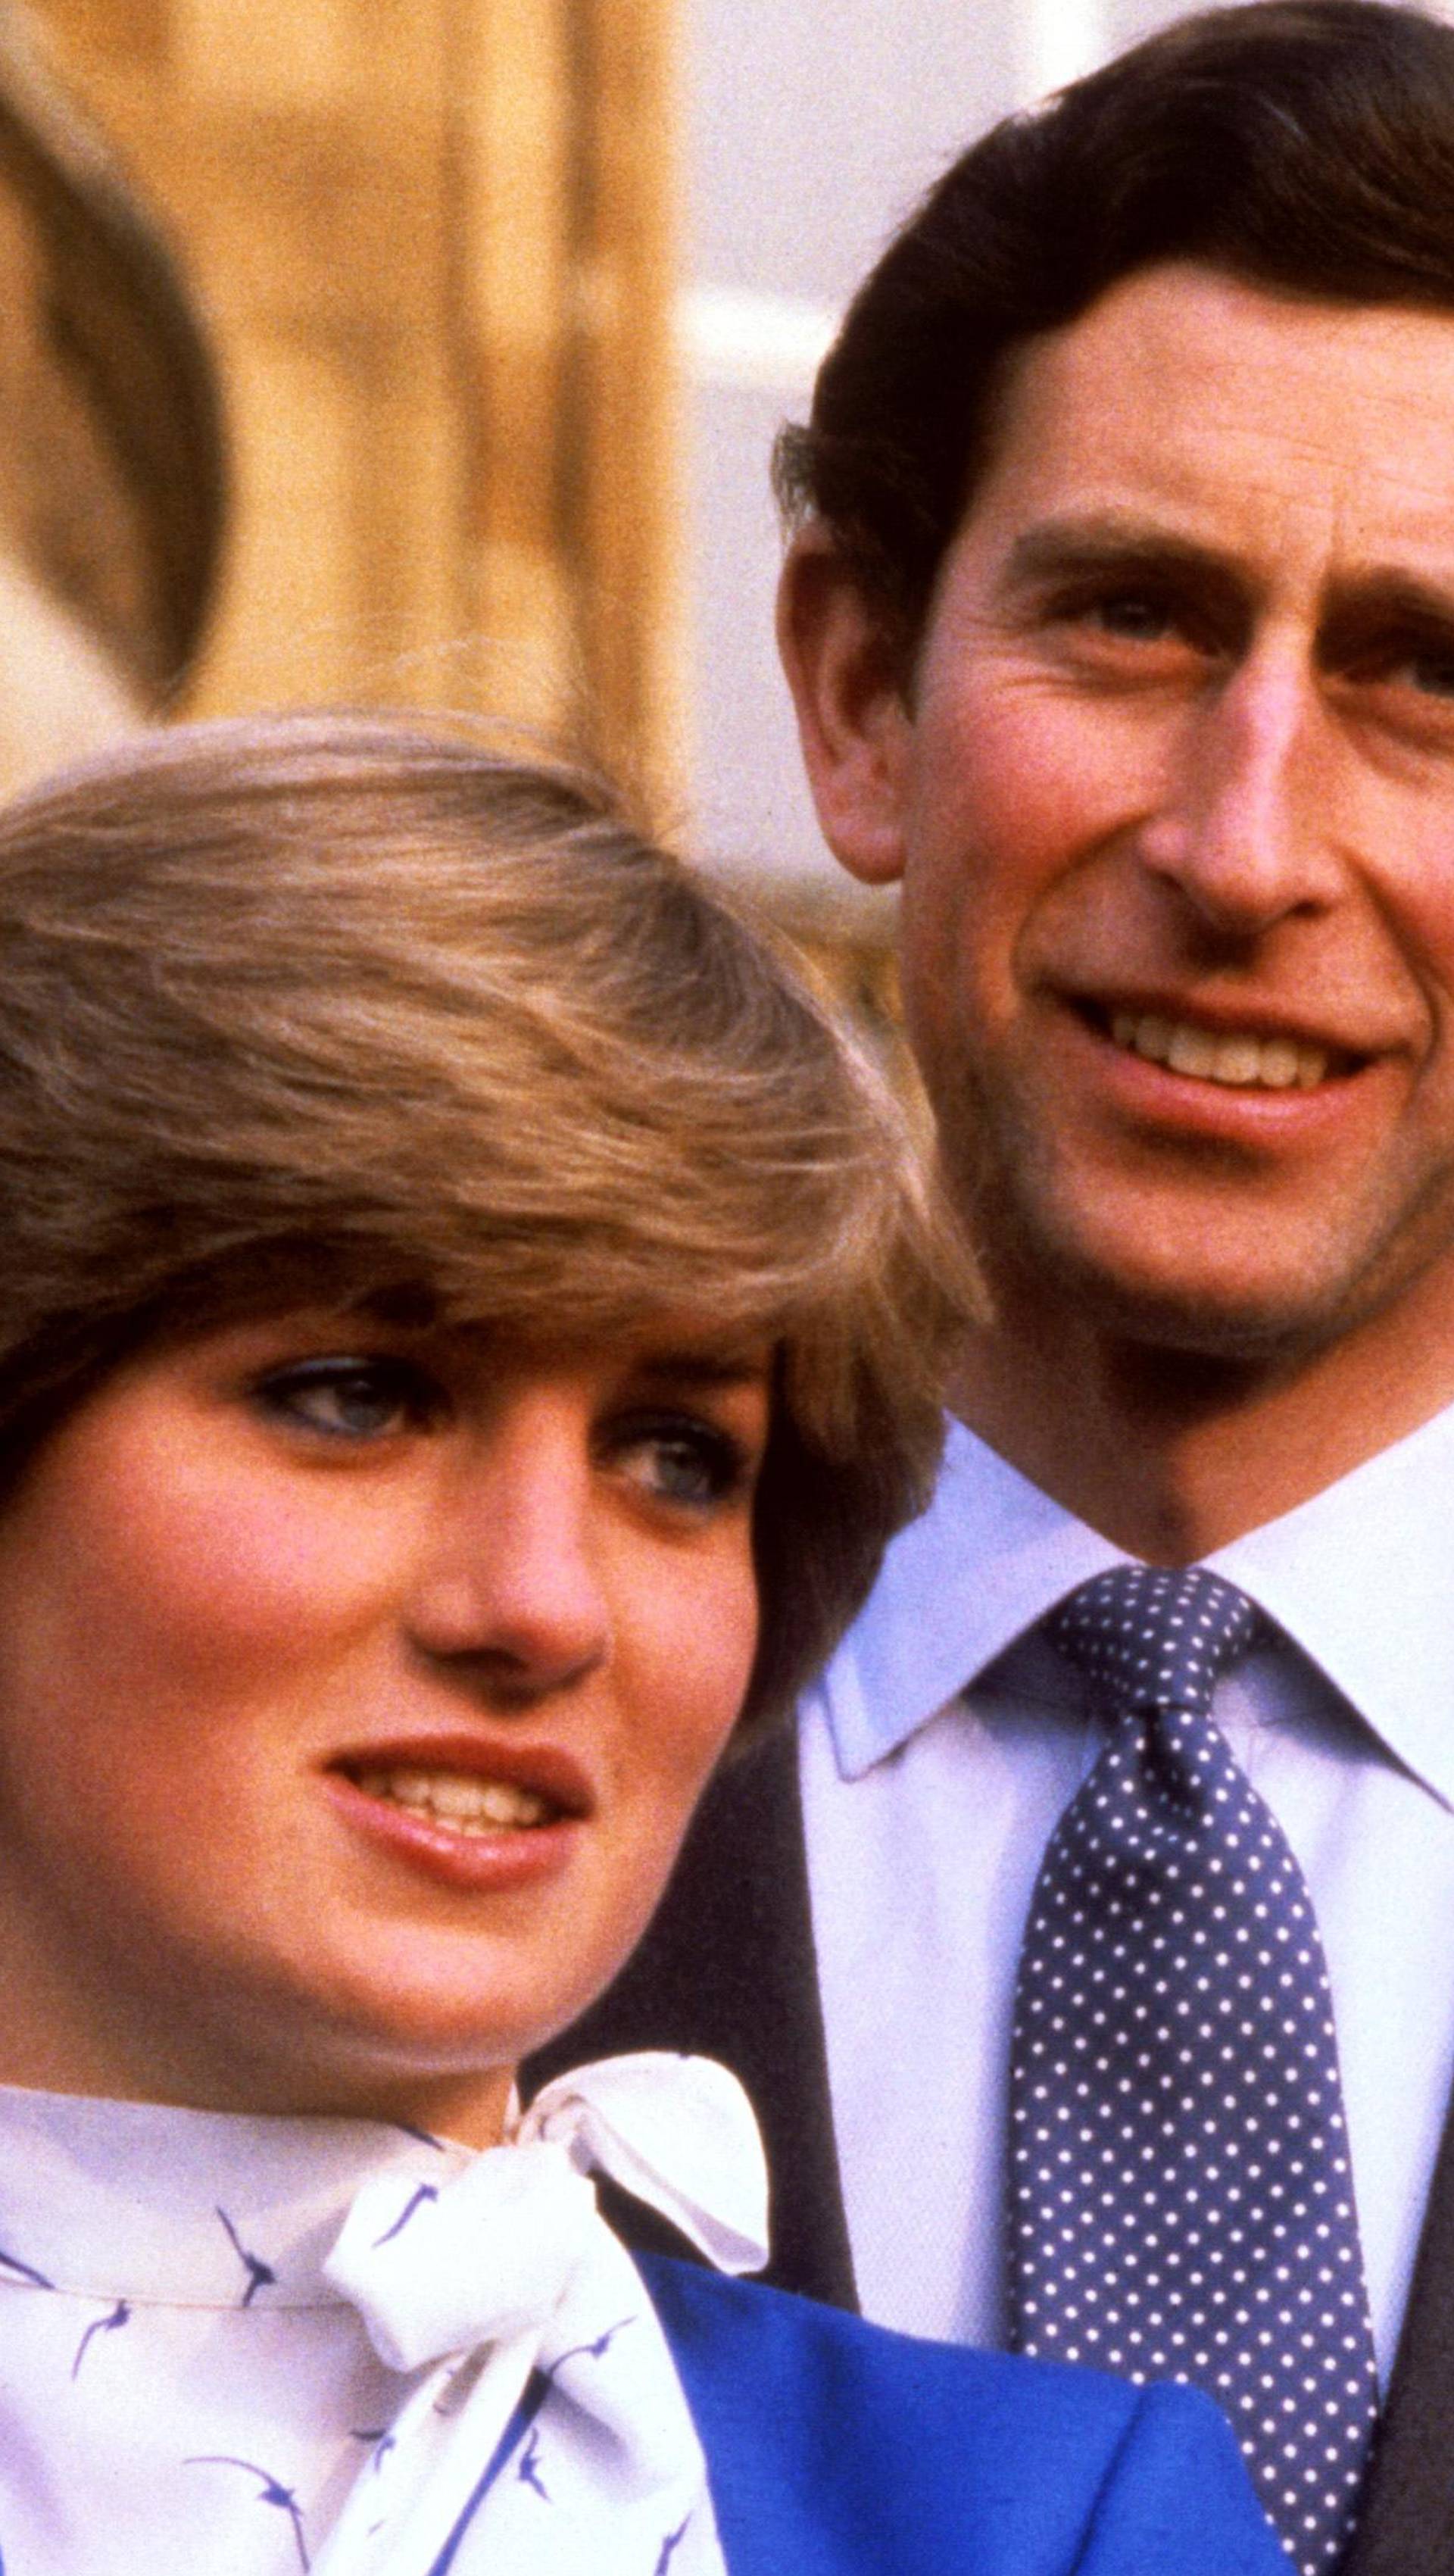 PRINCE CHARLES AND LADY DIANA SPENCER ENGAGEMENT